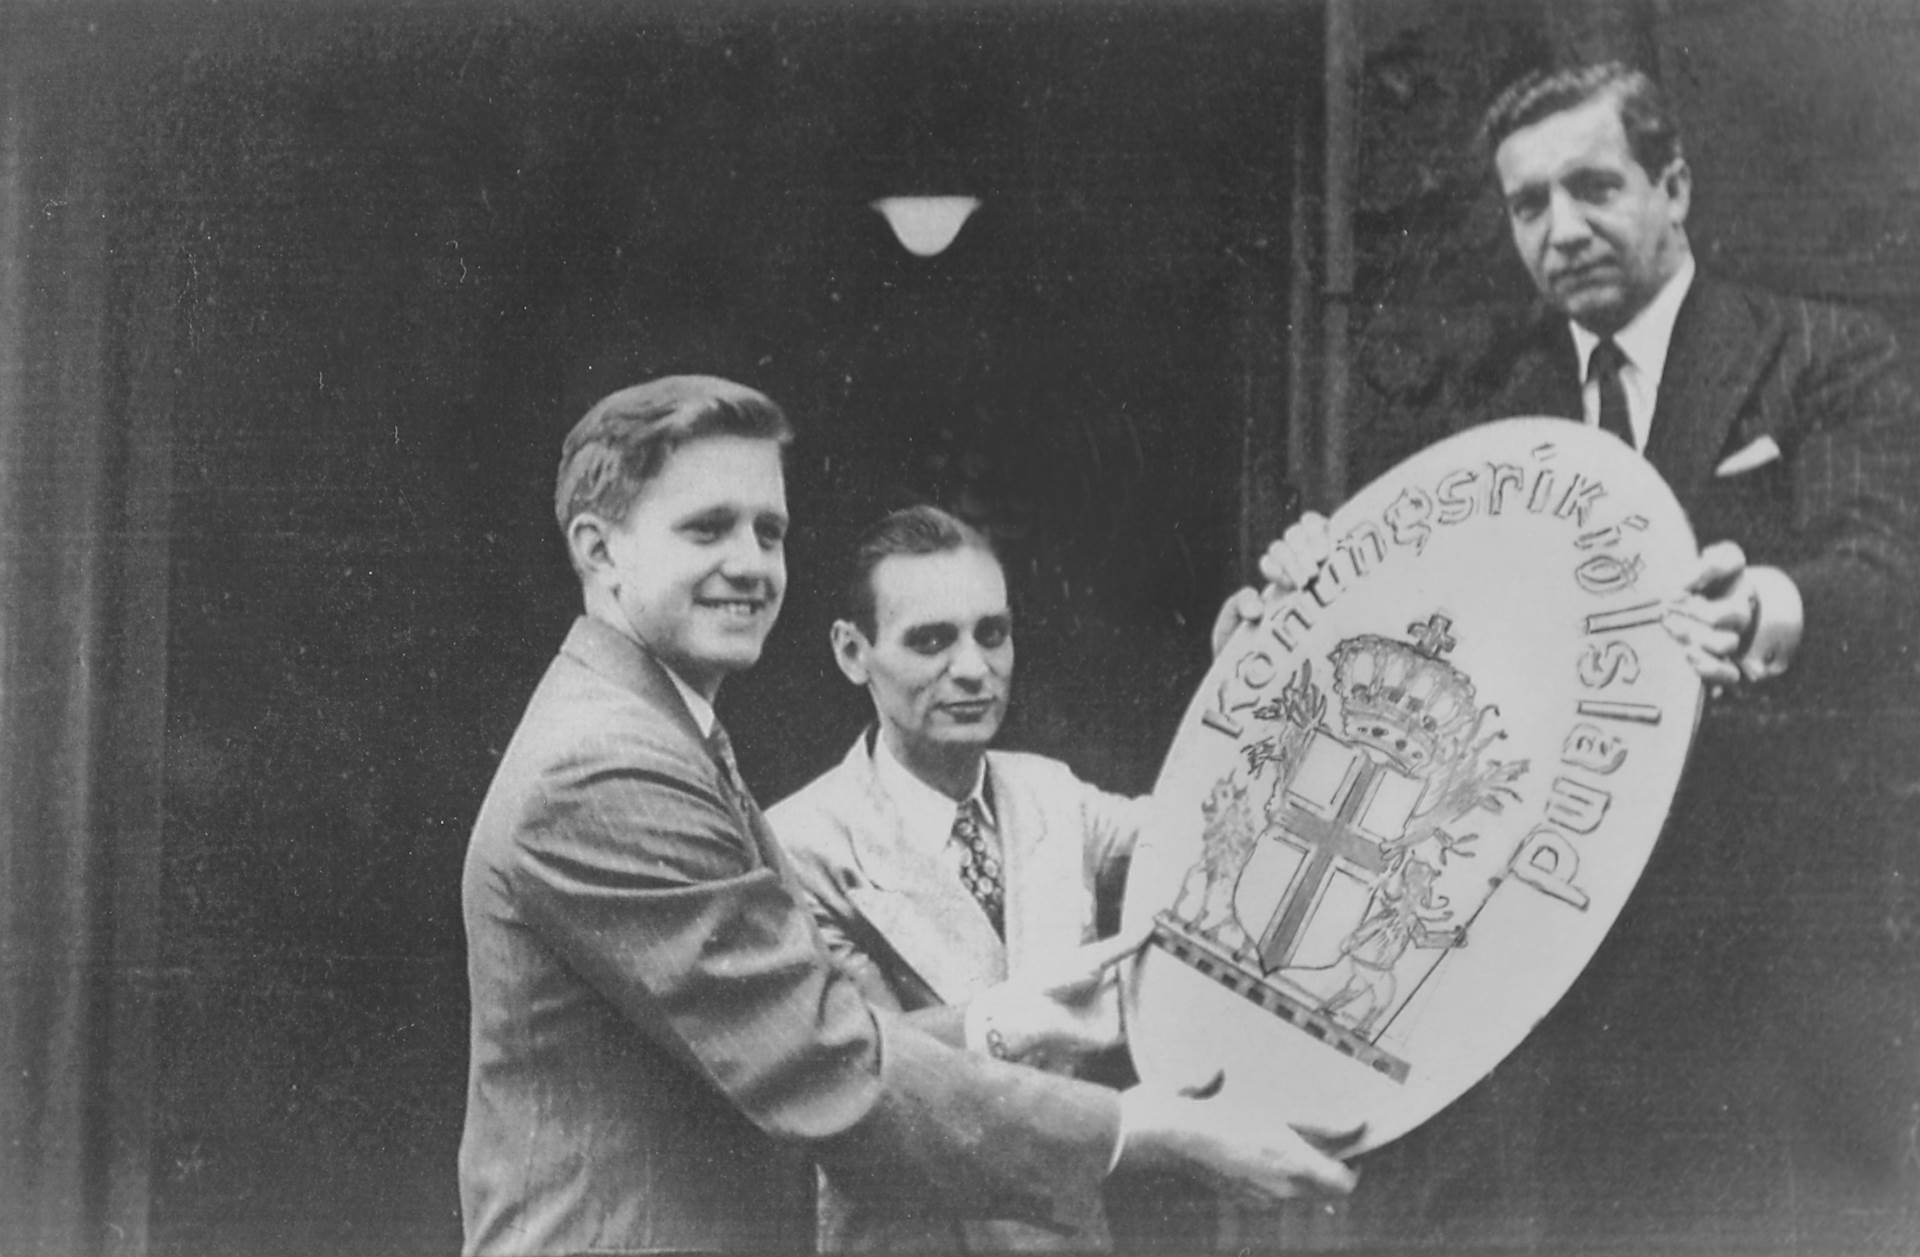 On 17 June 1944 the Republic of Iceland was established. Diplomats at the Icelandic Embassy in Washington DC are pictured removing the old coat of arms, reading “Kingdom of Iceland”. From left: Thórhallur Ásgeirsson, Trade Representative, Henrik Sv. Björnsson, First Secretary, and Thor Thors, Ambassador. - mynd